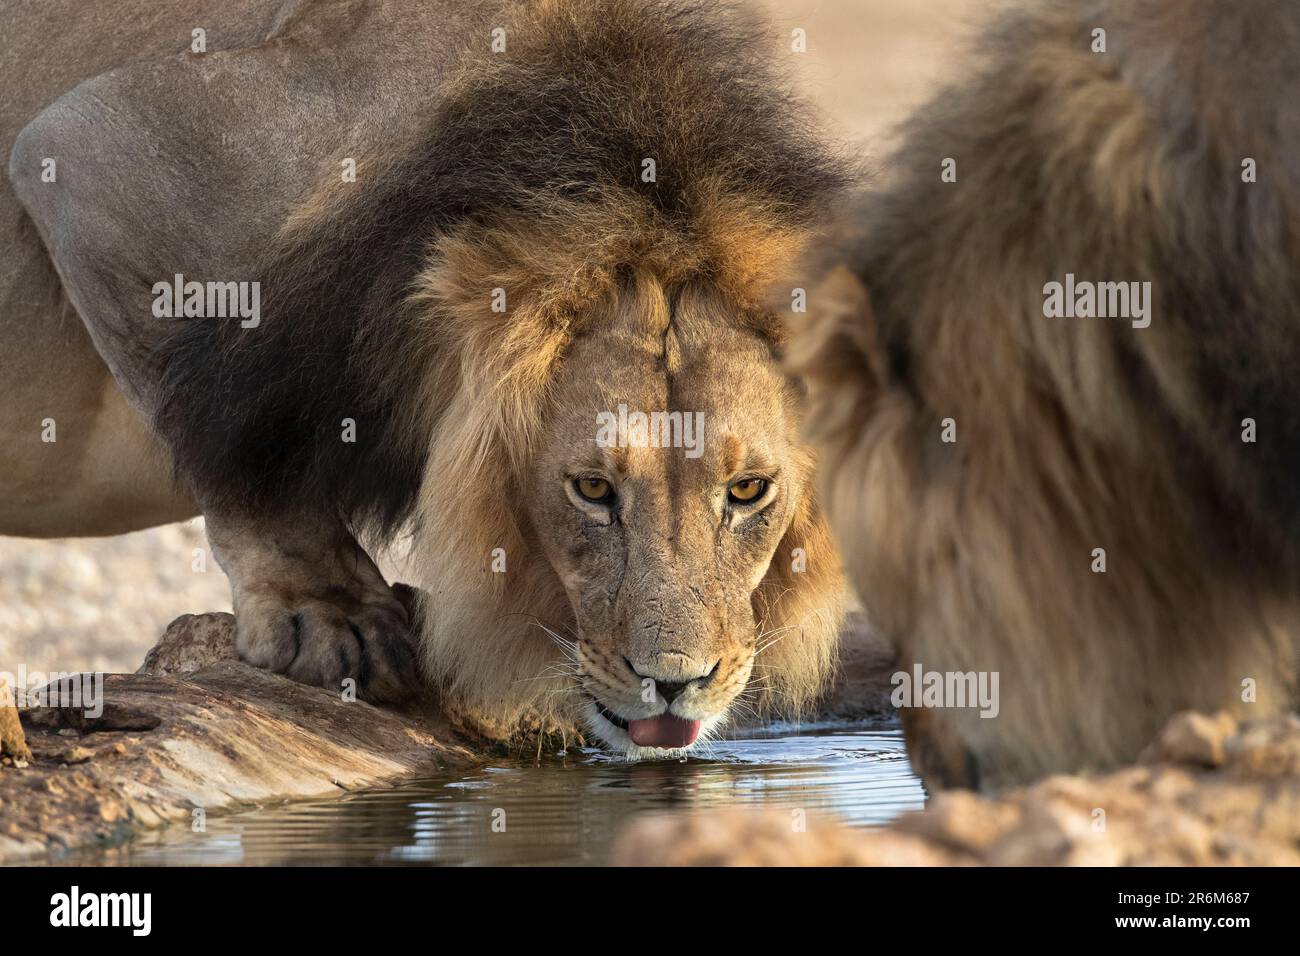 Lion (Panthera leo) drinking, Kgalagadi transfrontier park, Northern Cape, South Africa, Africa Stock Photo